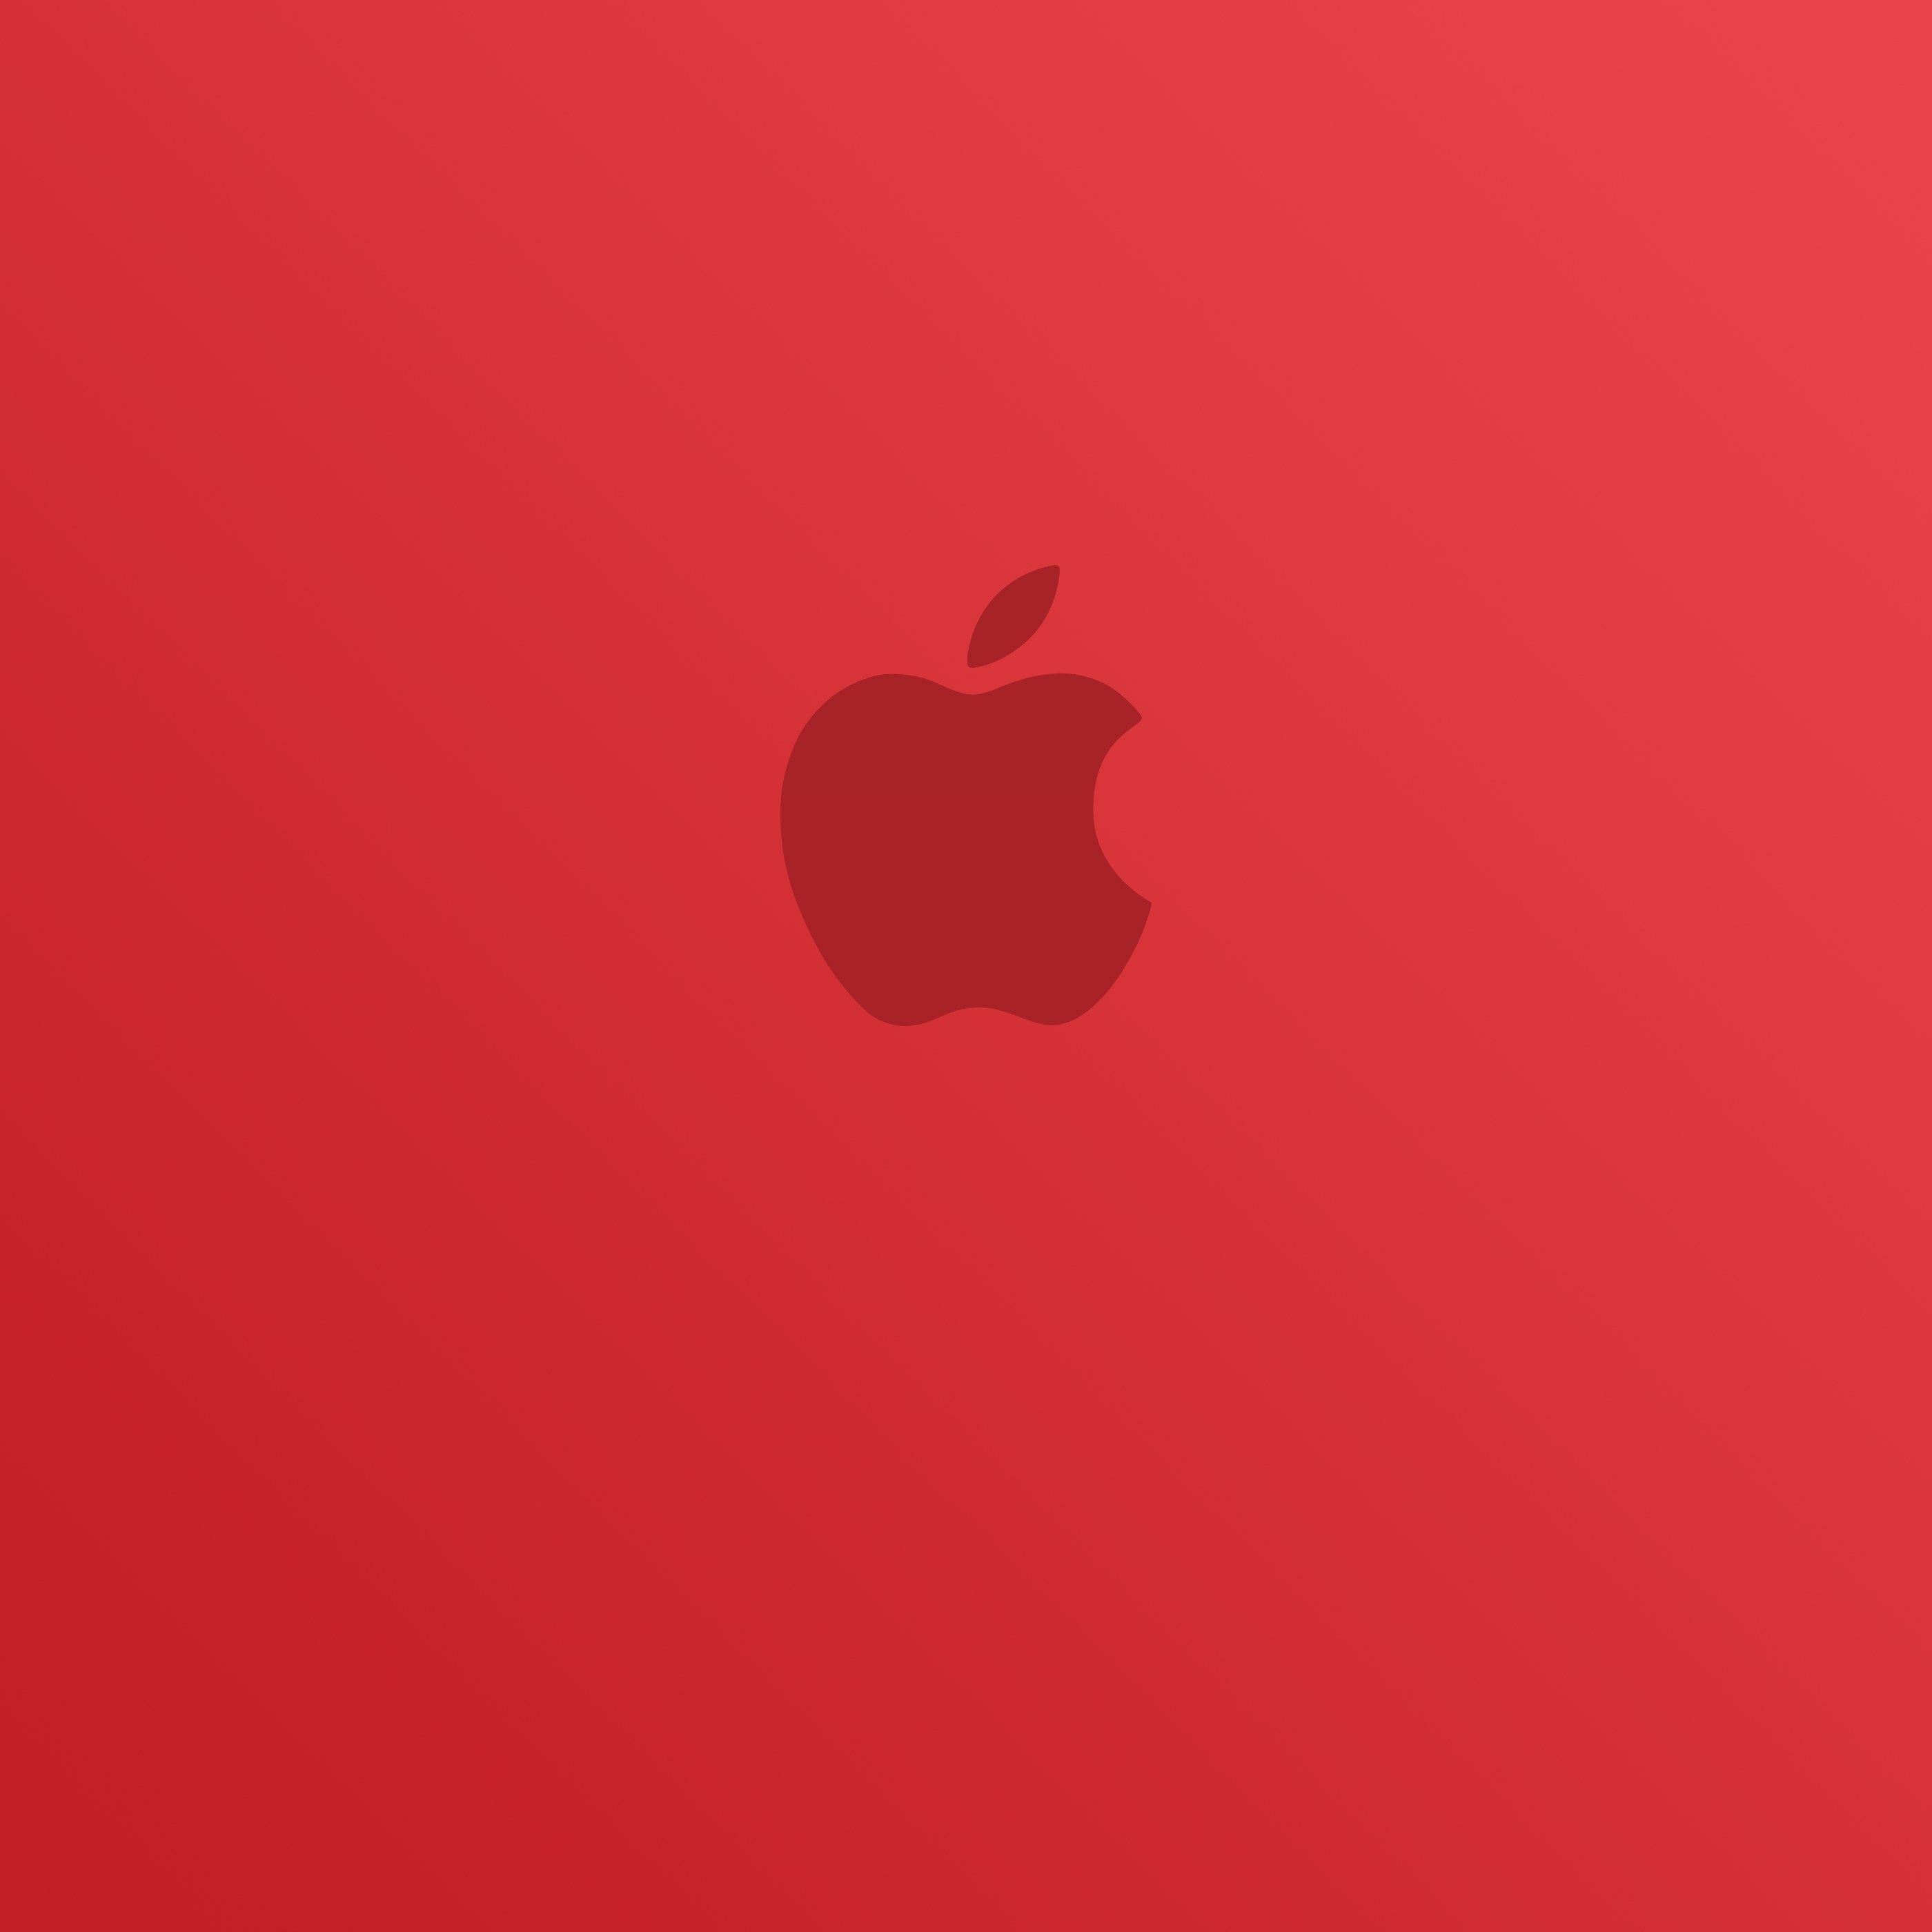 iWallpaper inspired Apple logo background. iPad and iPhone